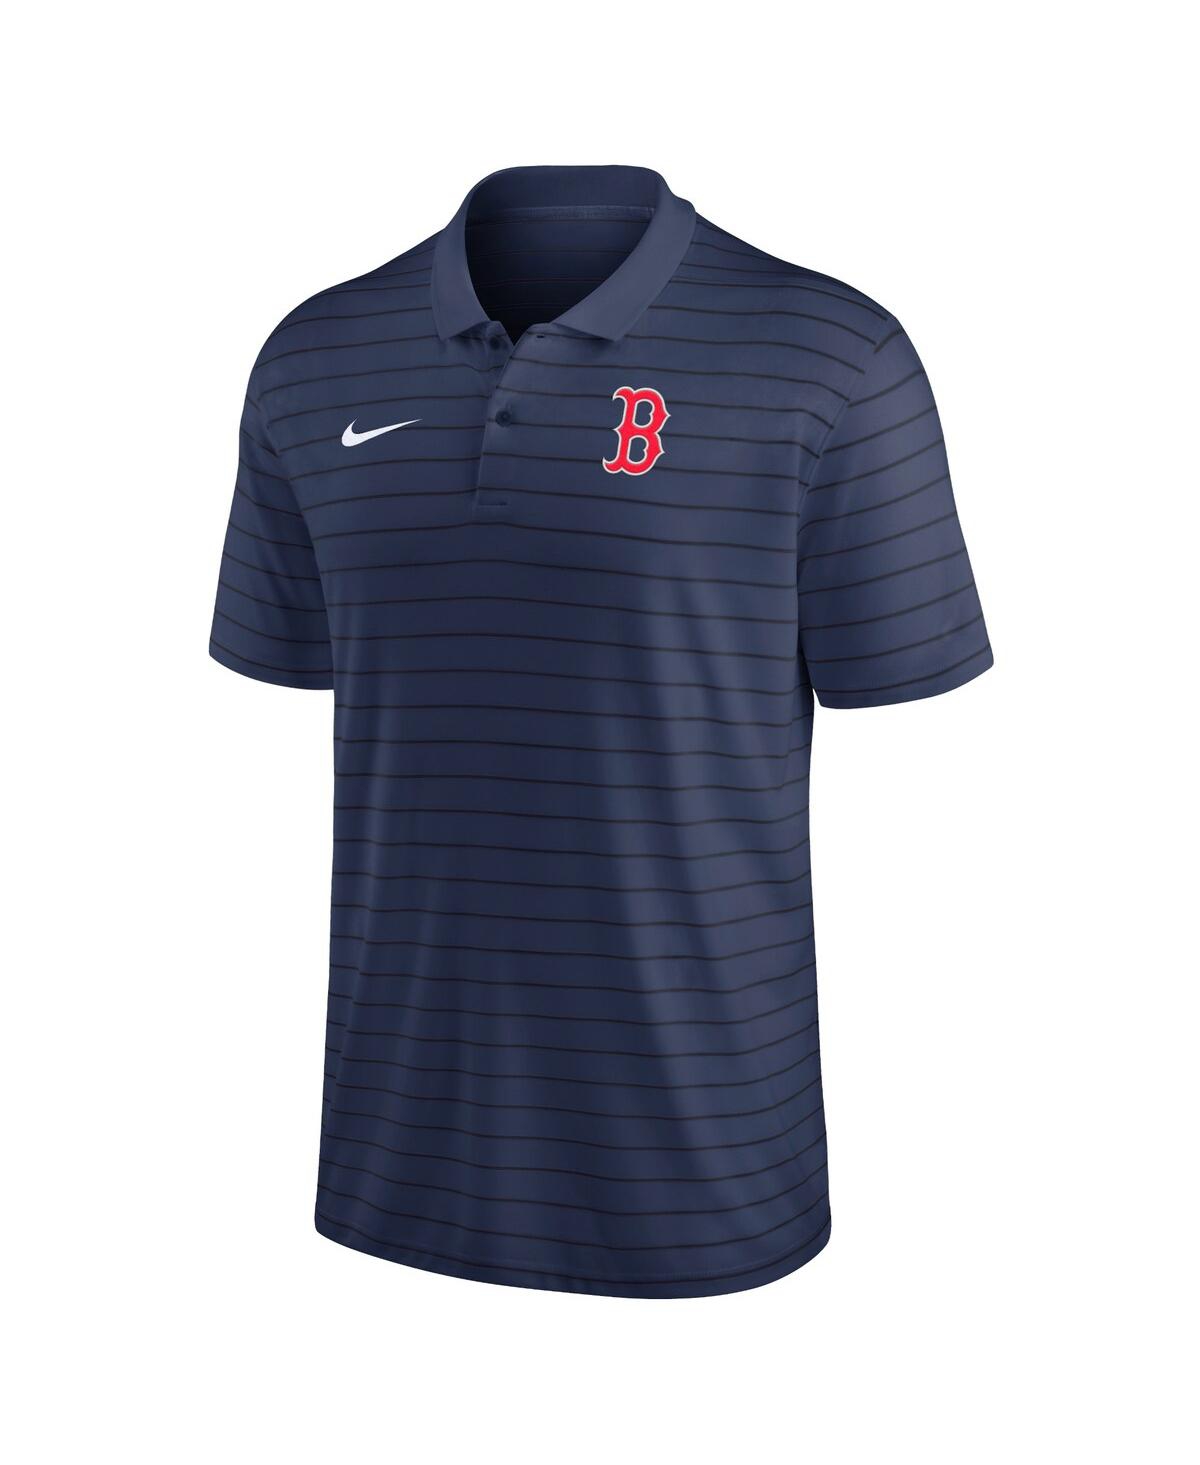 Shop Nike Men's  Navy Boston Red Sox Authentic Collection Victory Striped Performance Polo Shirt